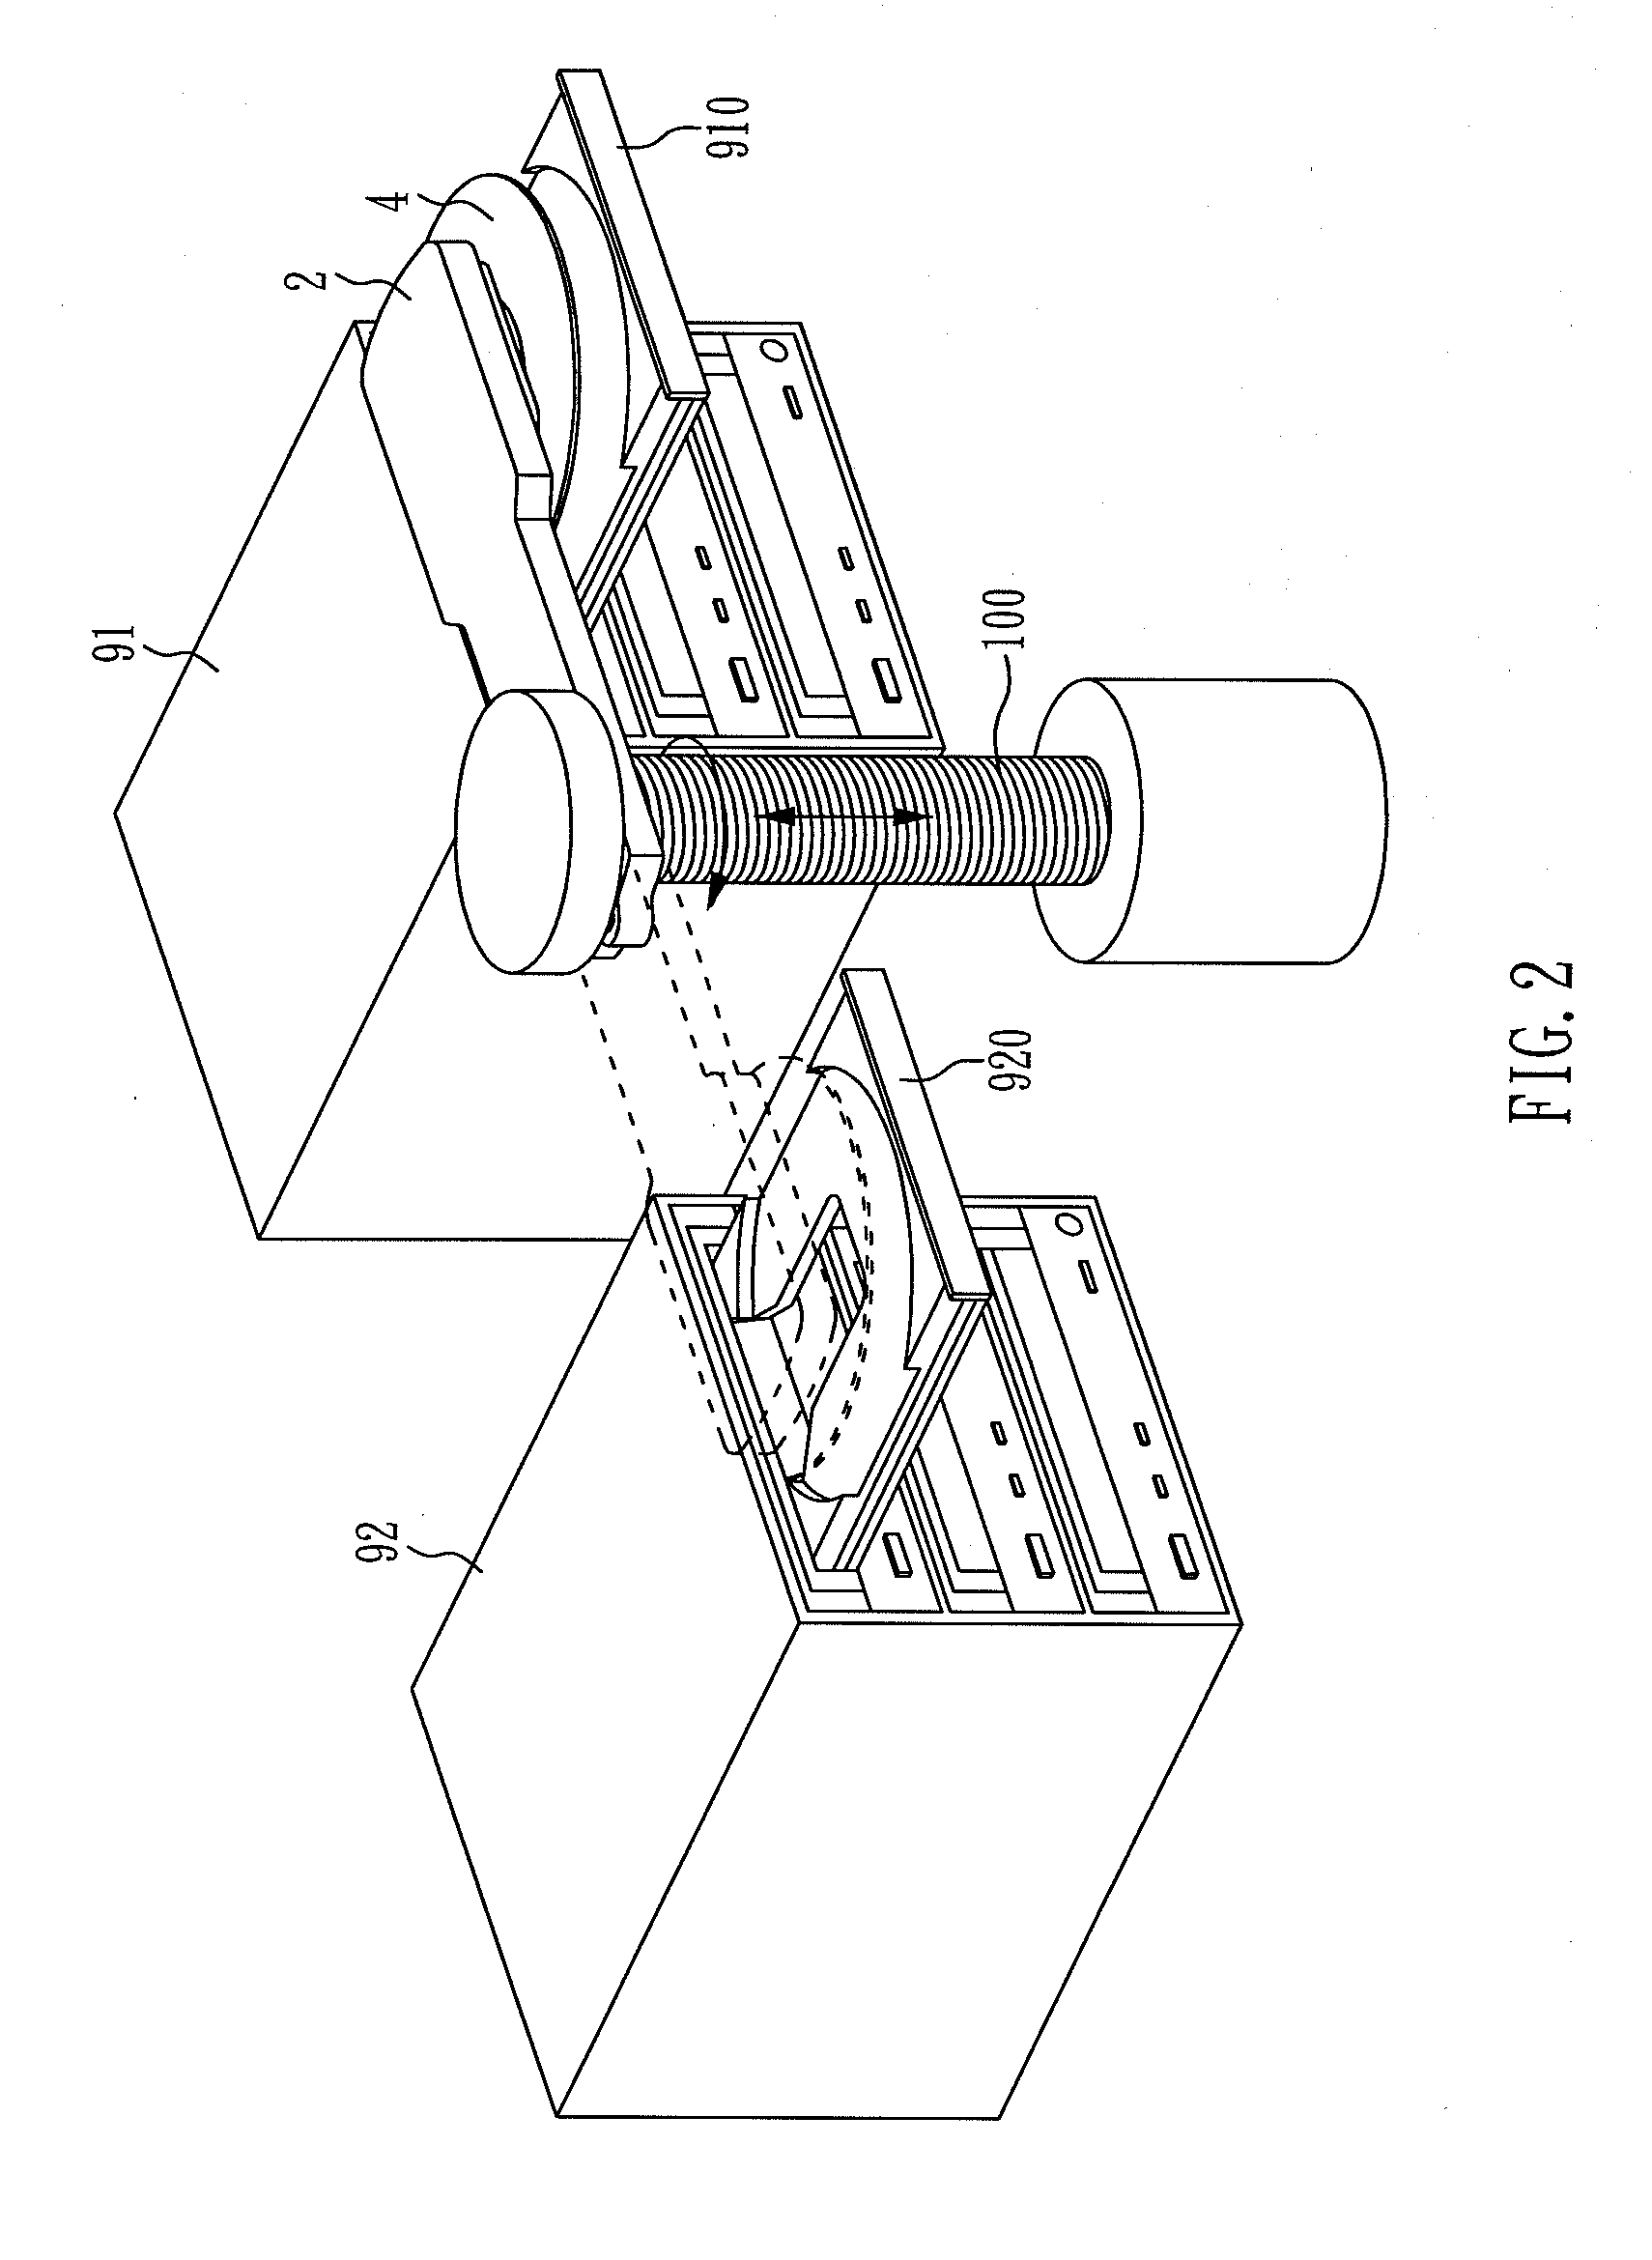 Transportation Arm Device for Carrying Discs